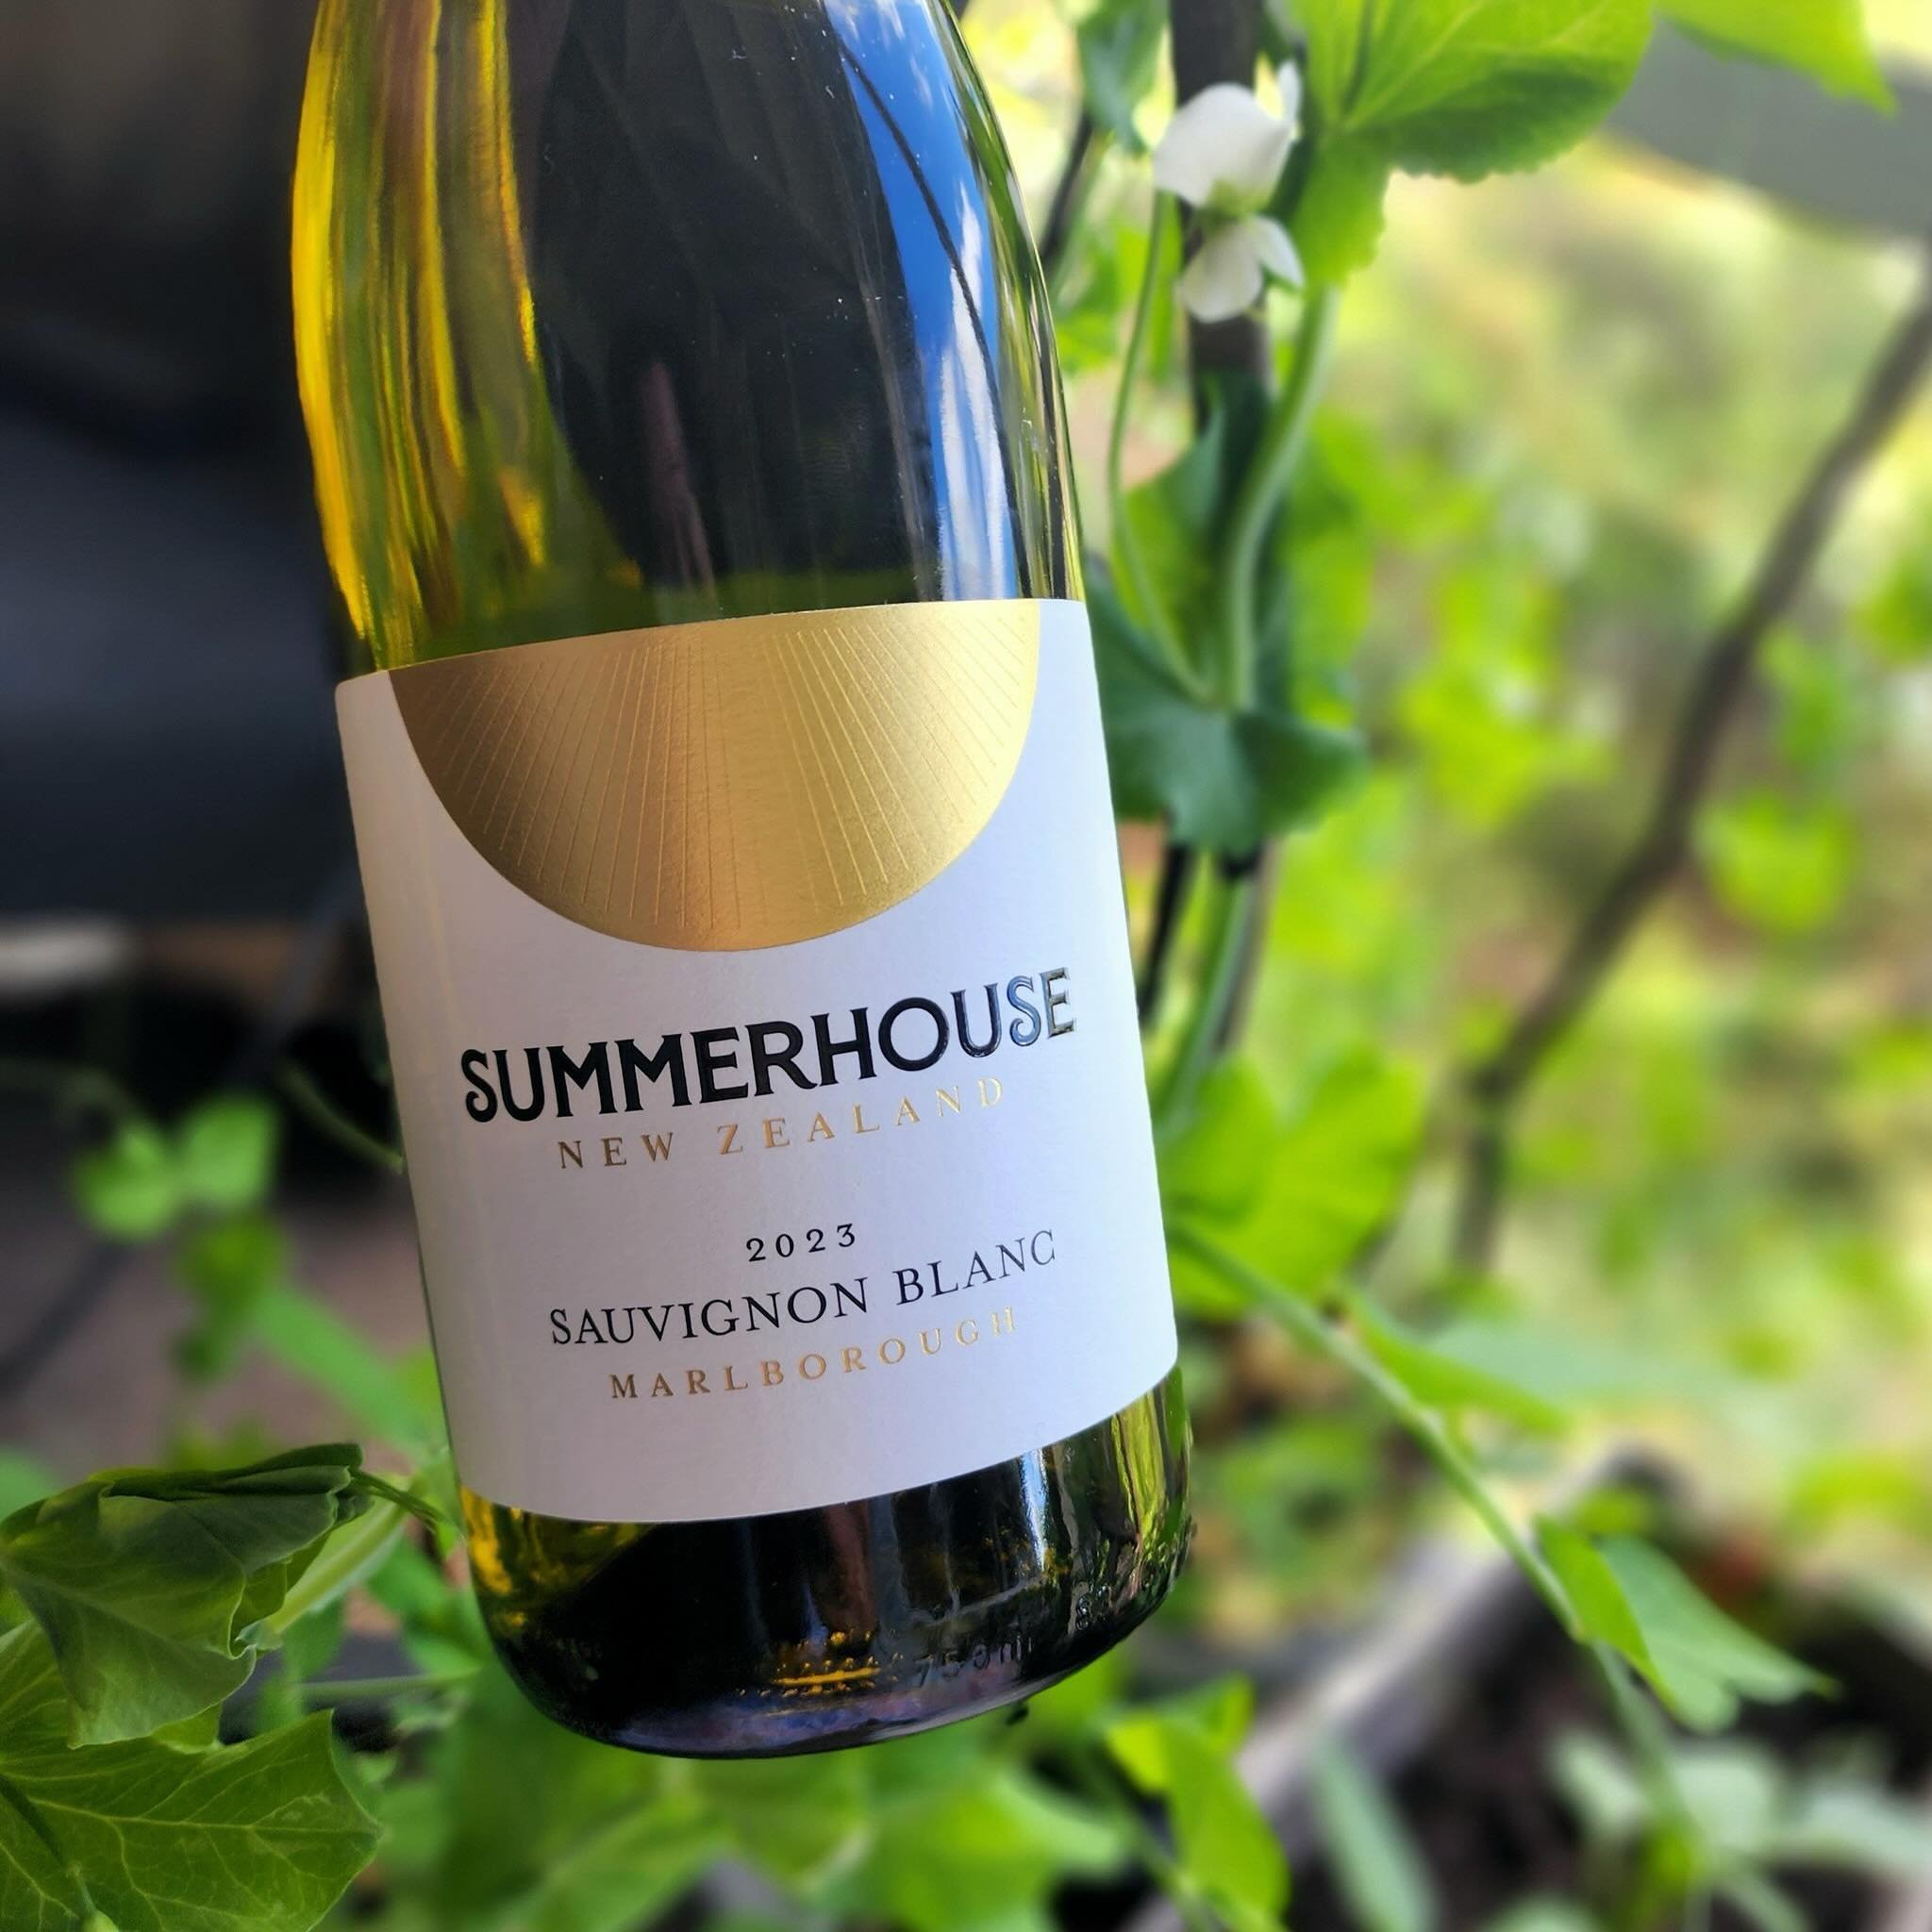 &ldquo;...A delicious, refreshing Sauvignon Blanc bursting with ripe fruit and zing!&rdquo;⁠
⁠
We love this description from @thecandicewinechat awarding our Sauvignon Blanc 93 points 🥂⁠
⁠.⁠
.⁠
.⁠
.⁠
#Summerhousewine #nzsauvignonblanc #winereviews #